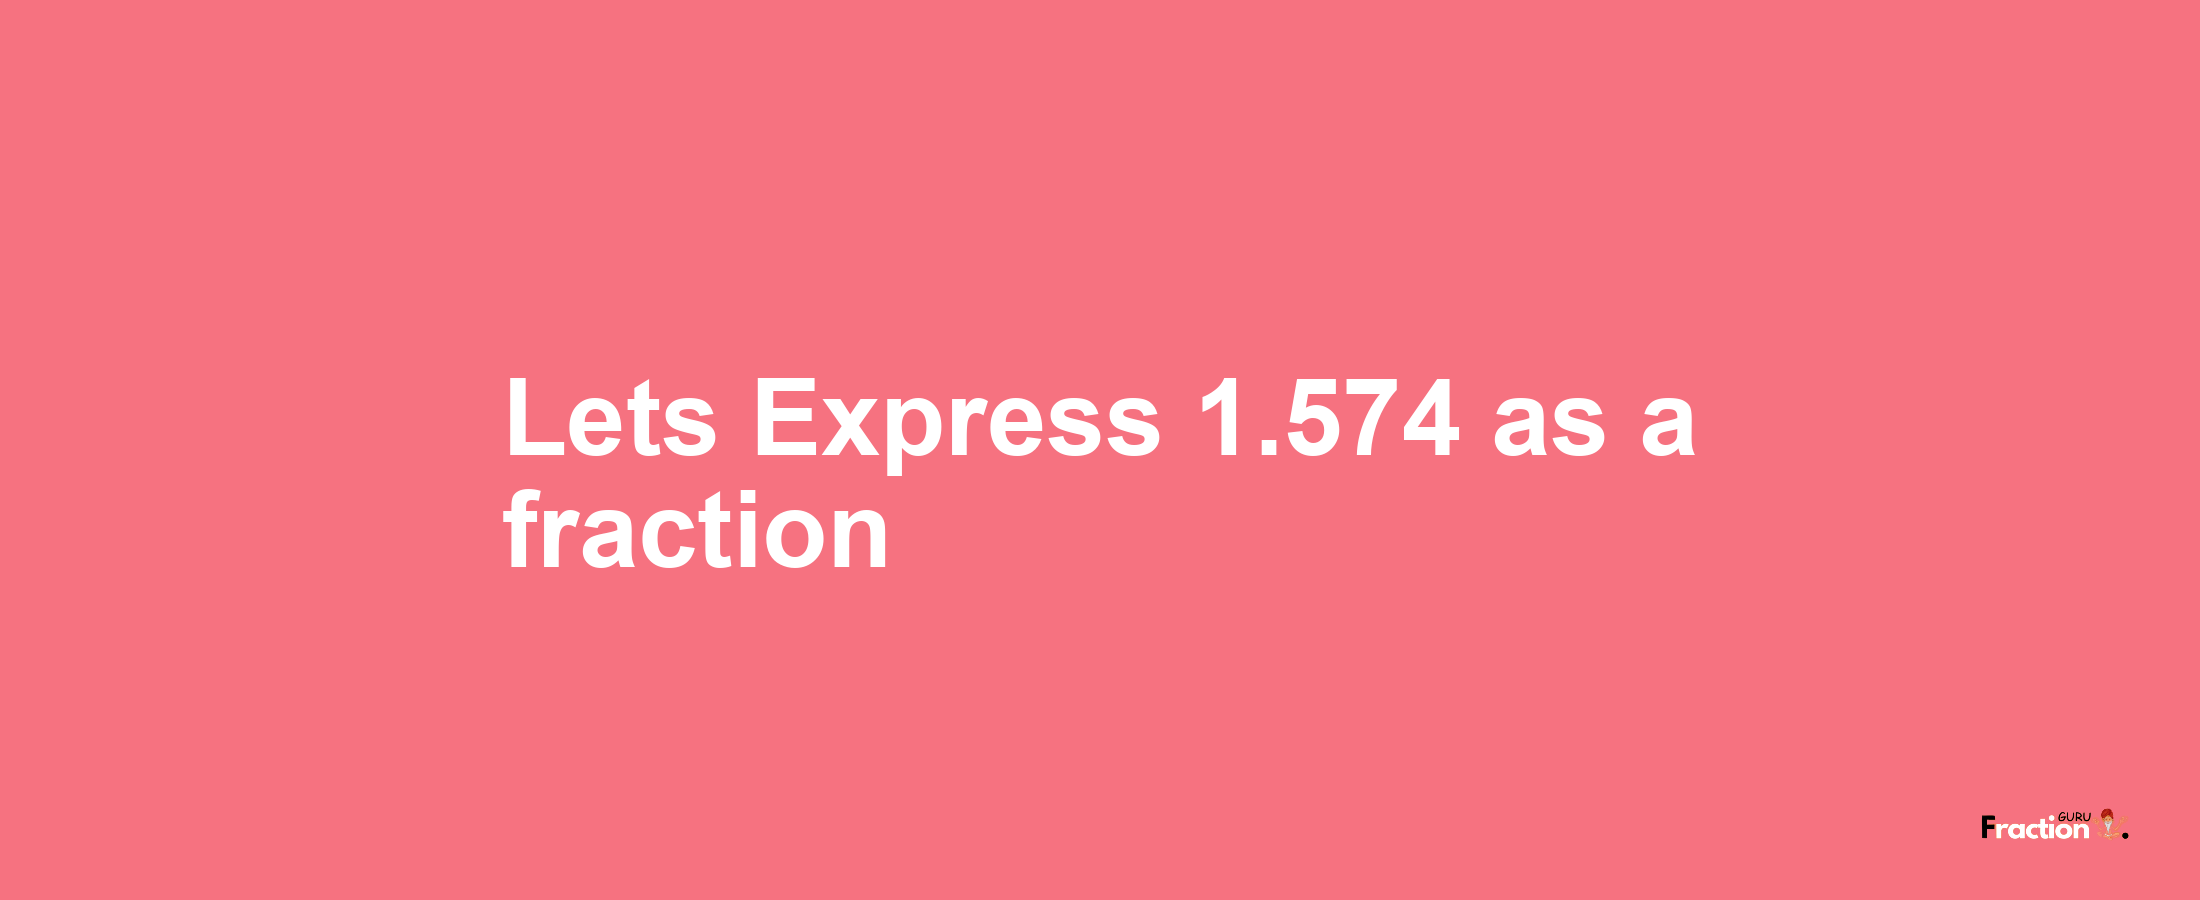 Lets Express 1.574 as afraction